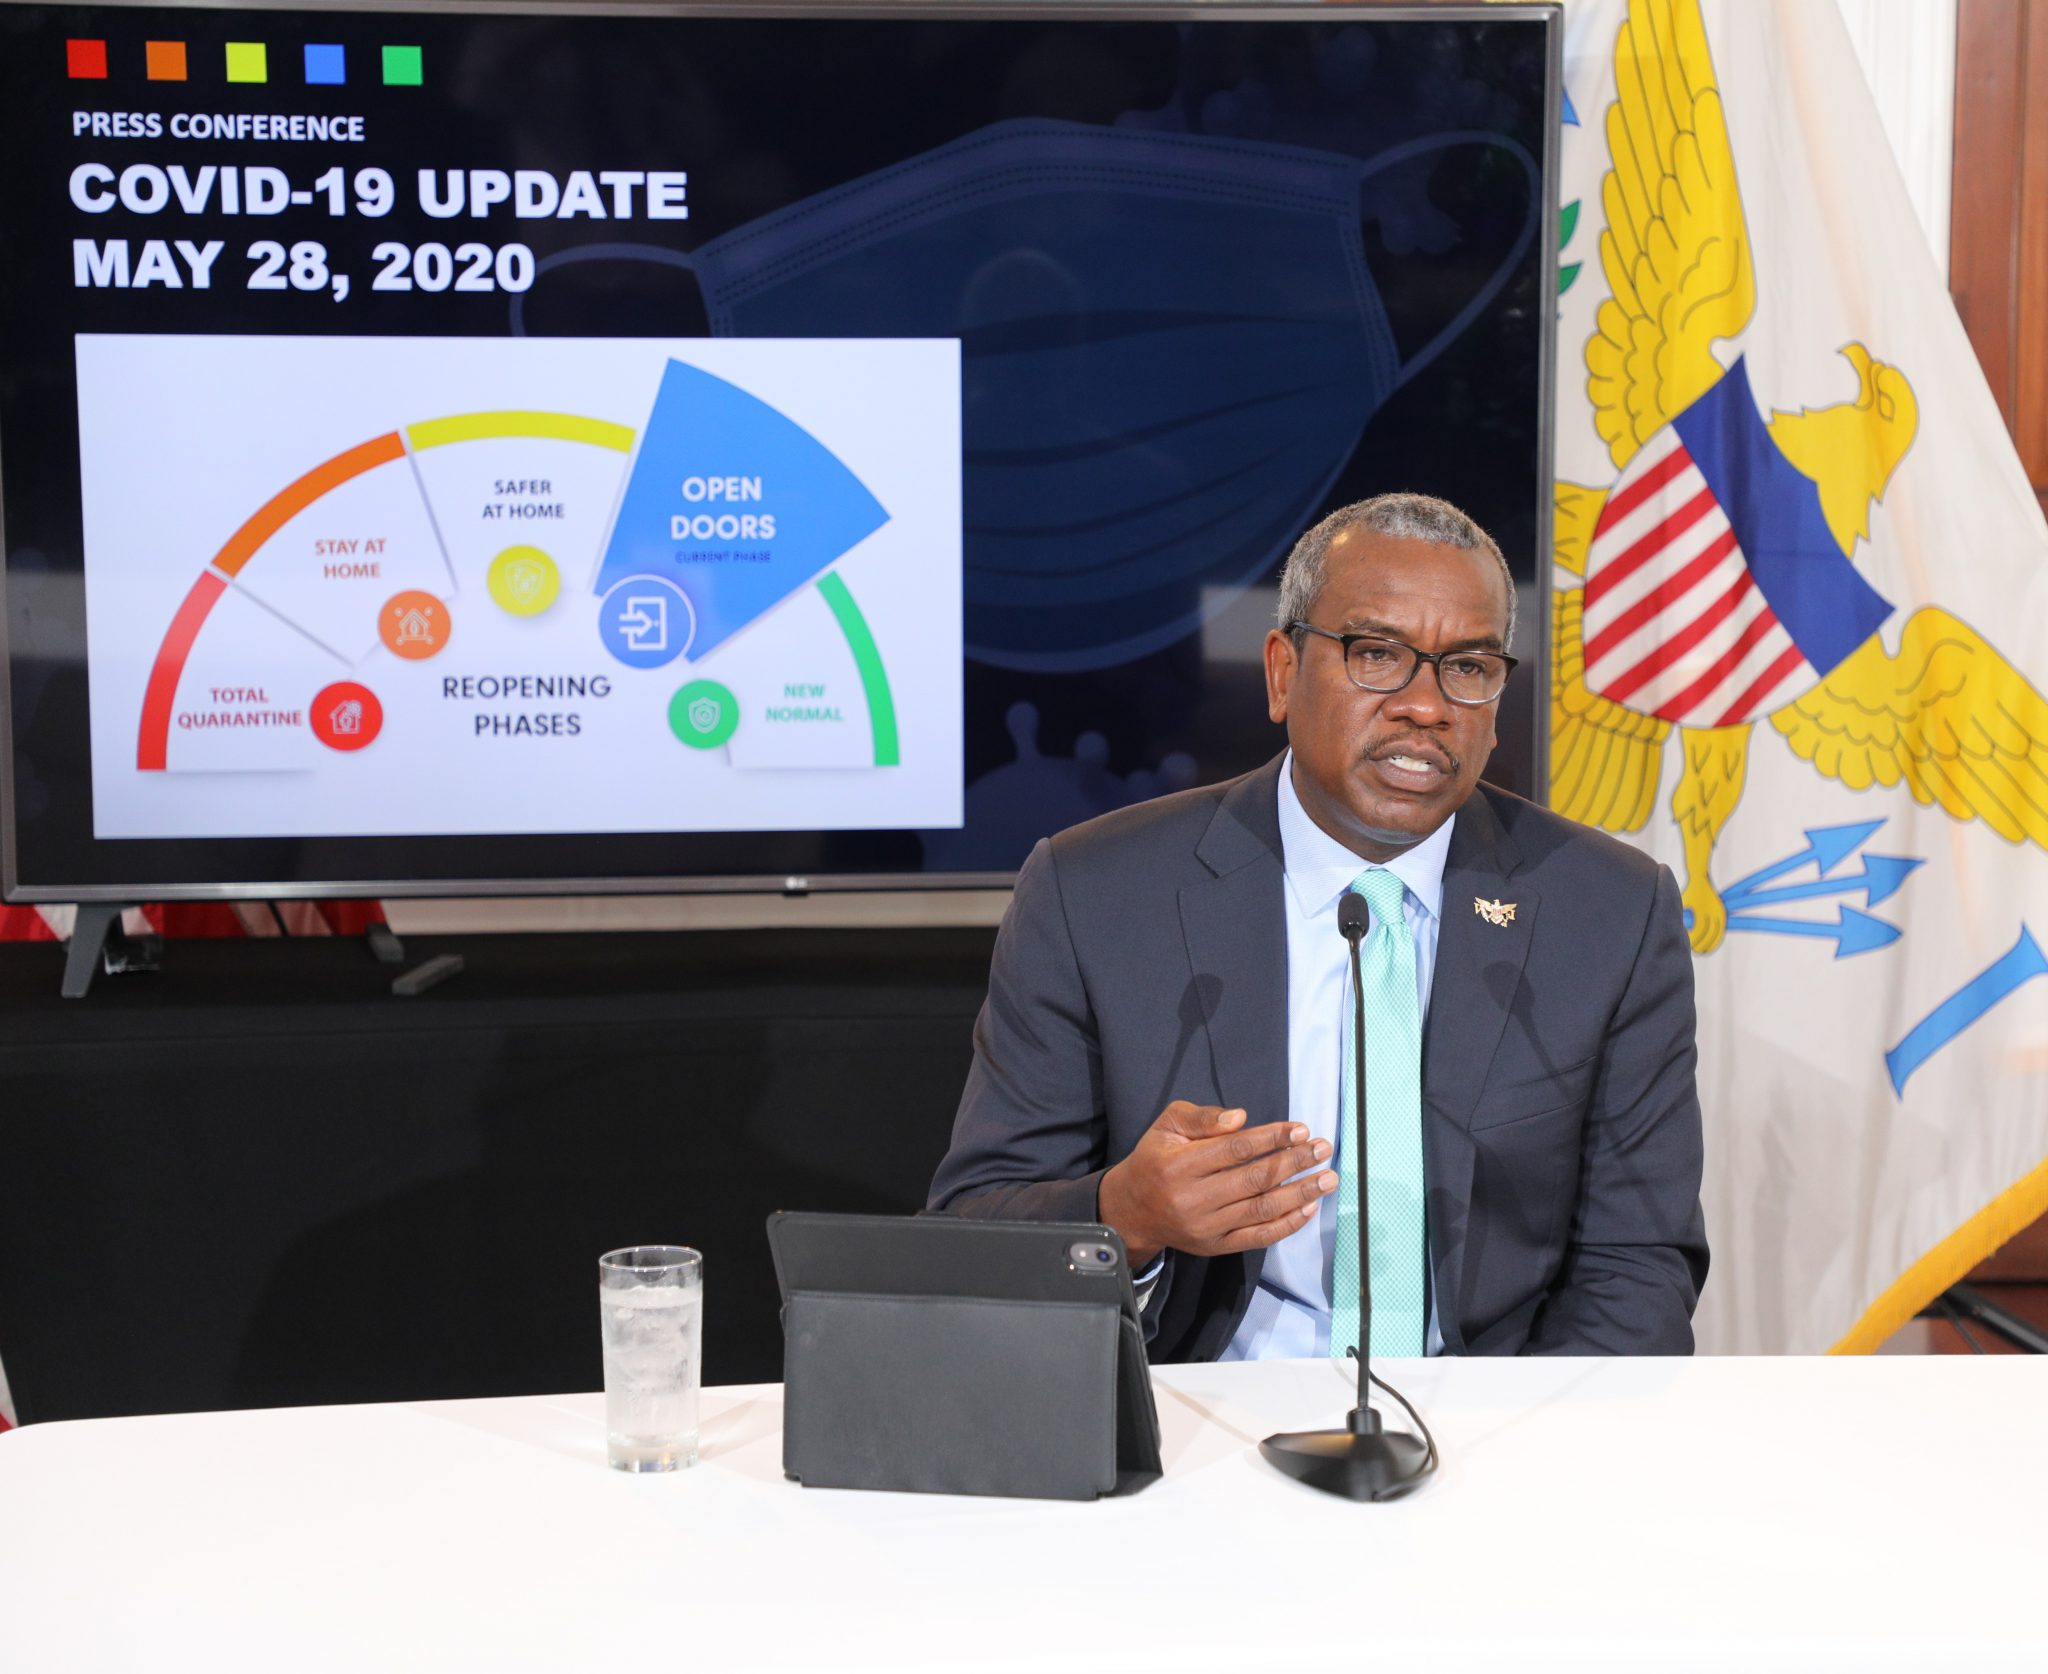 Governor Bryan Initiates ‘Open Doors' Phase Of USVI’s Reopening from COVID-19